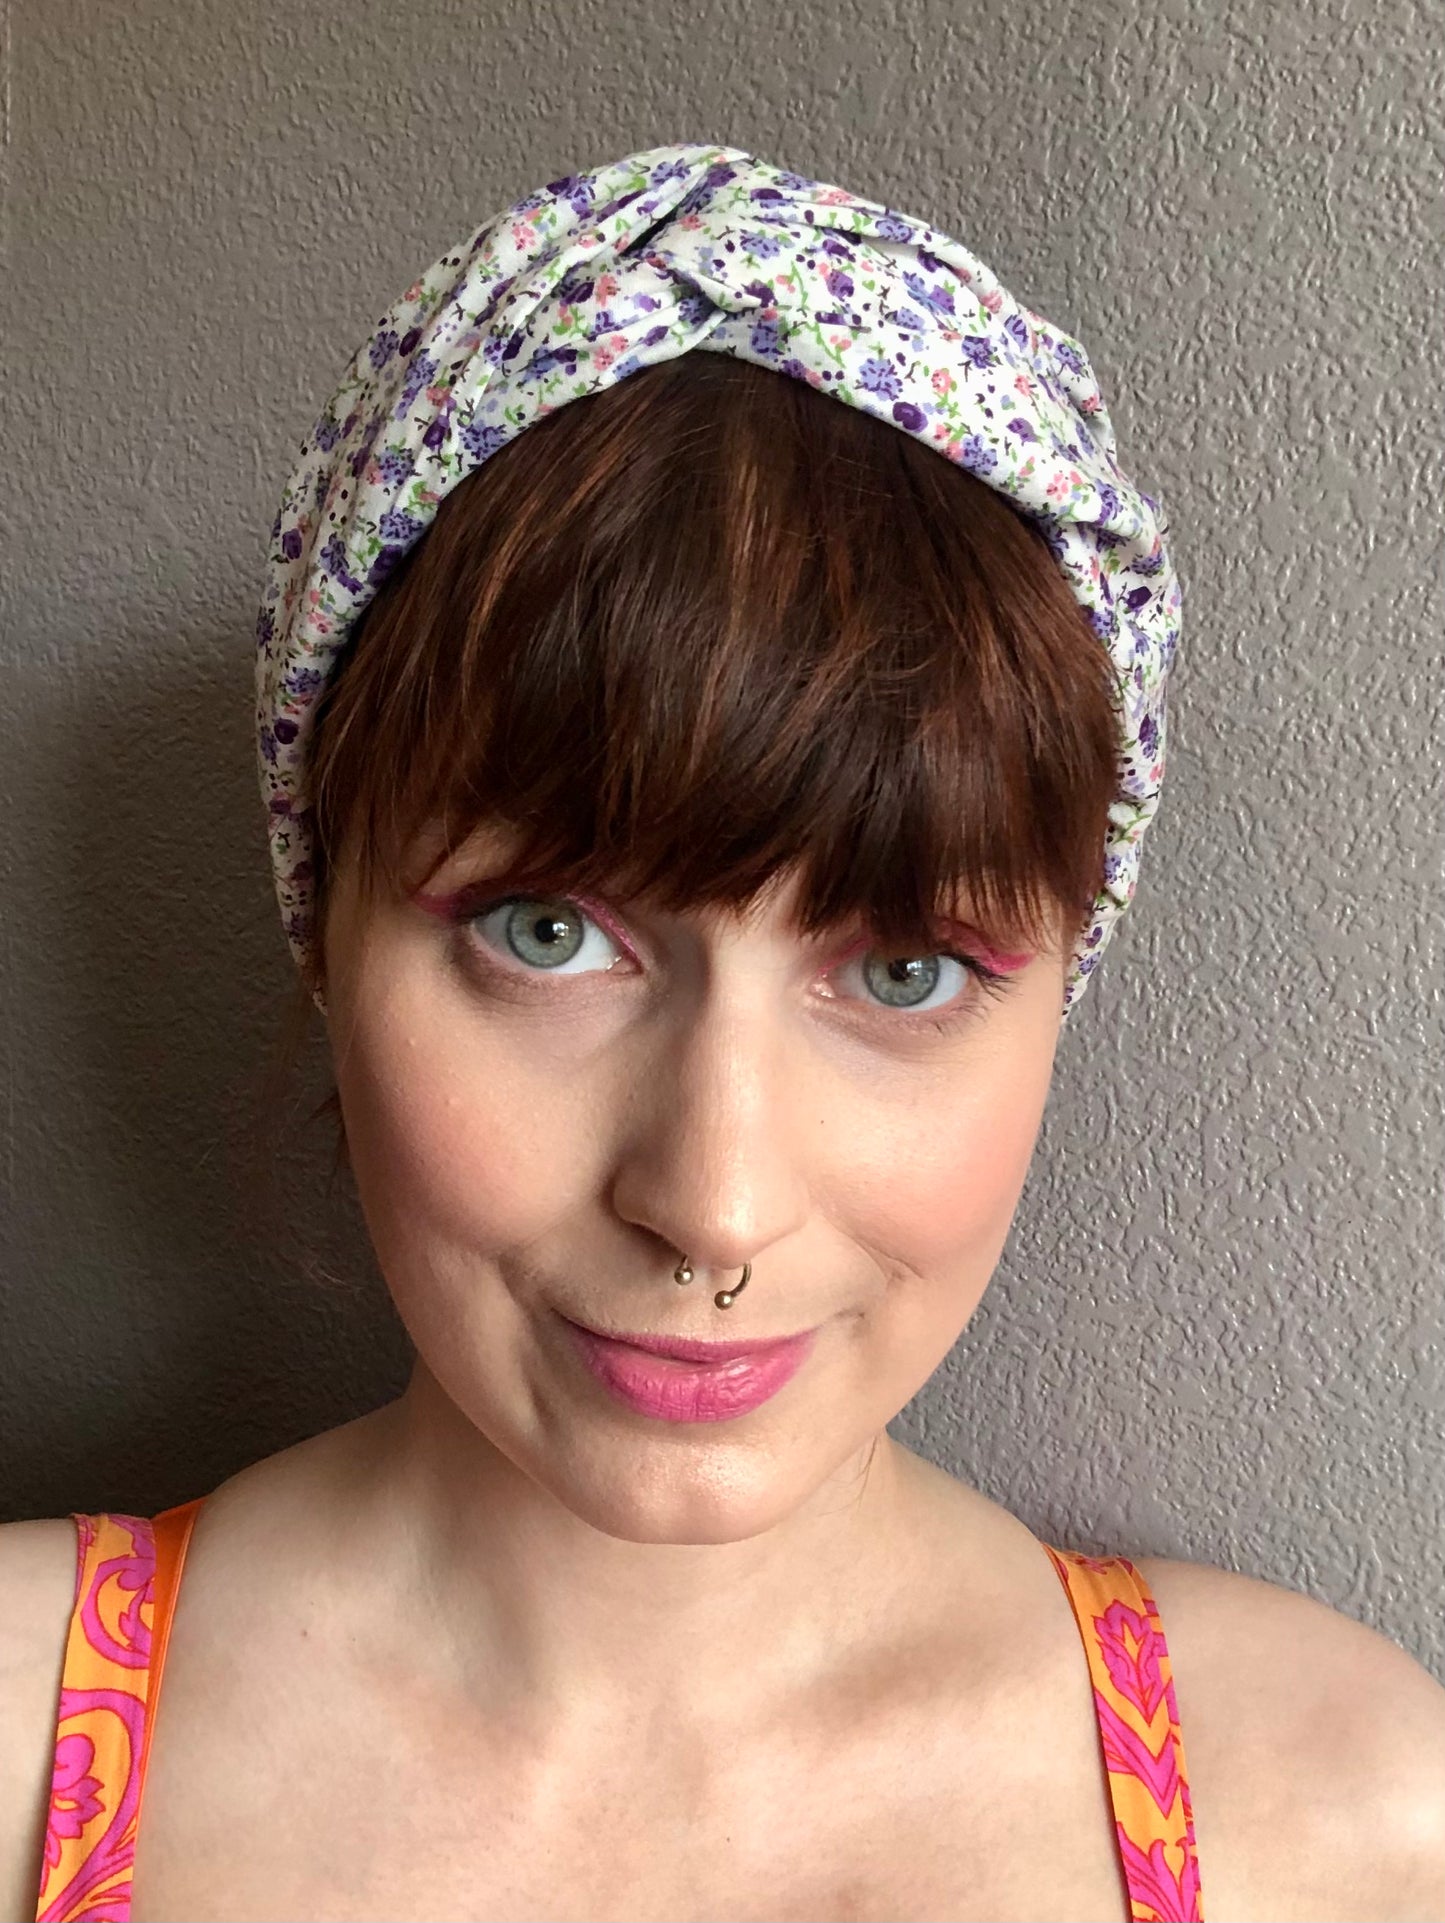 Lilac ditsy floral print on white wire wrap headband